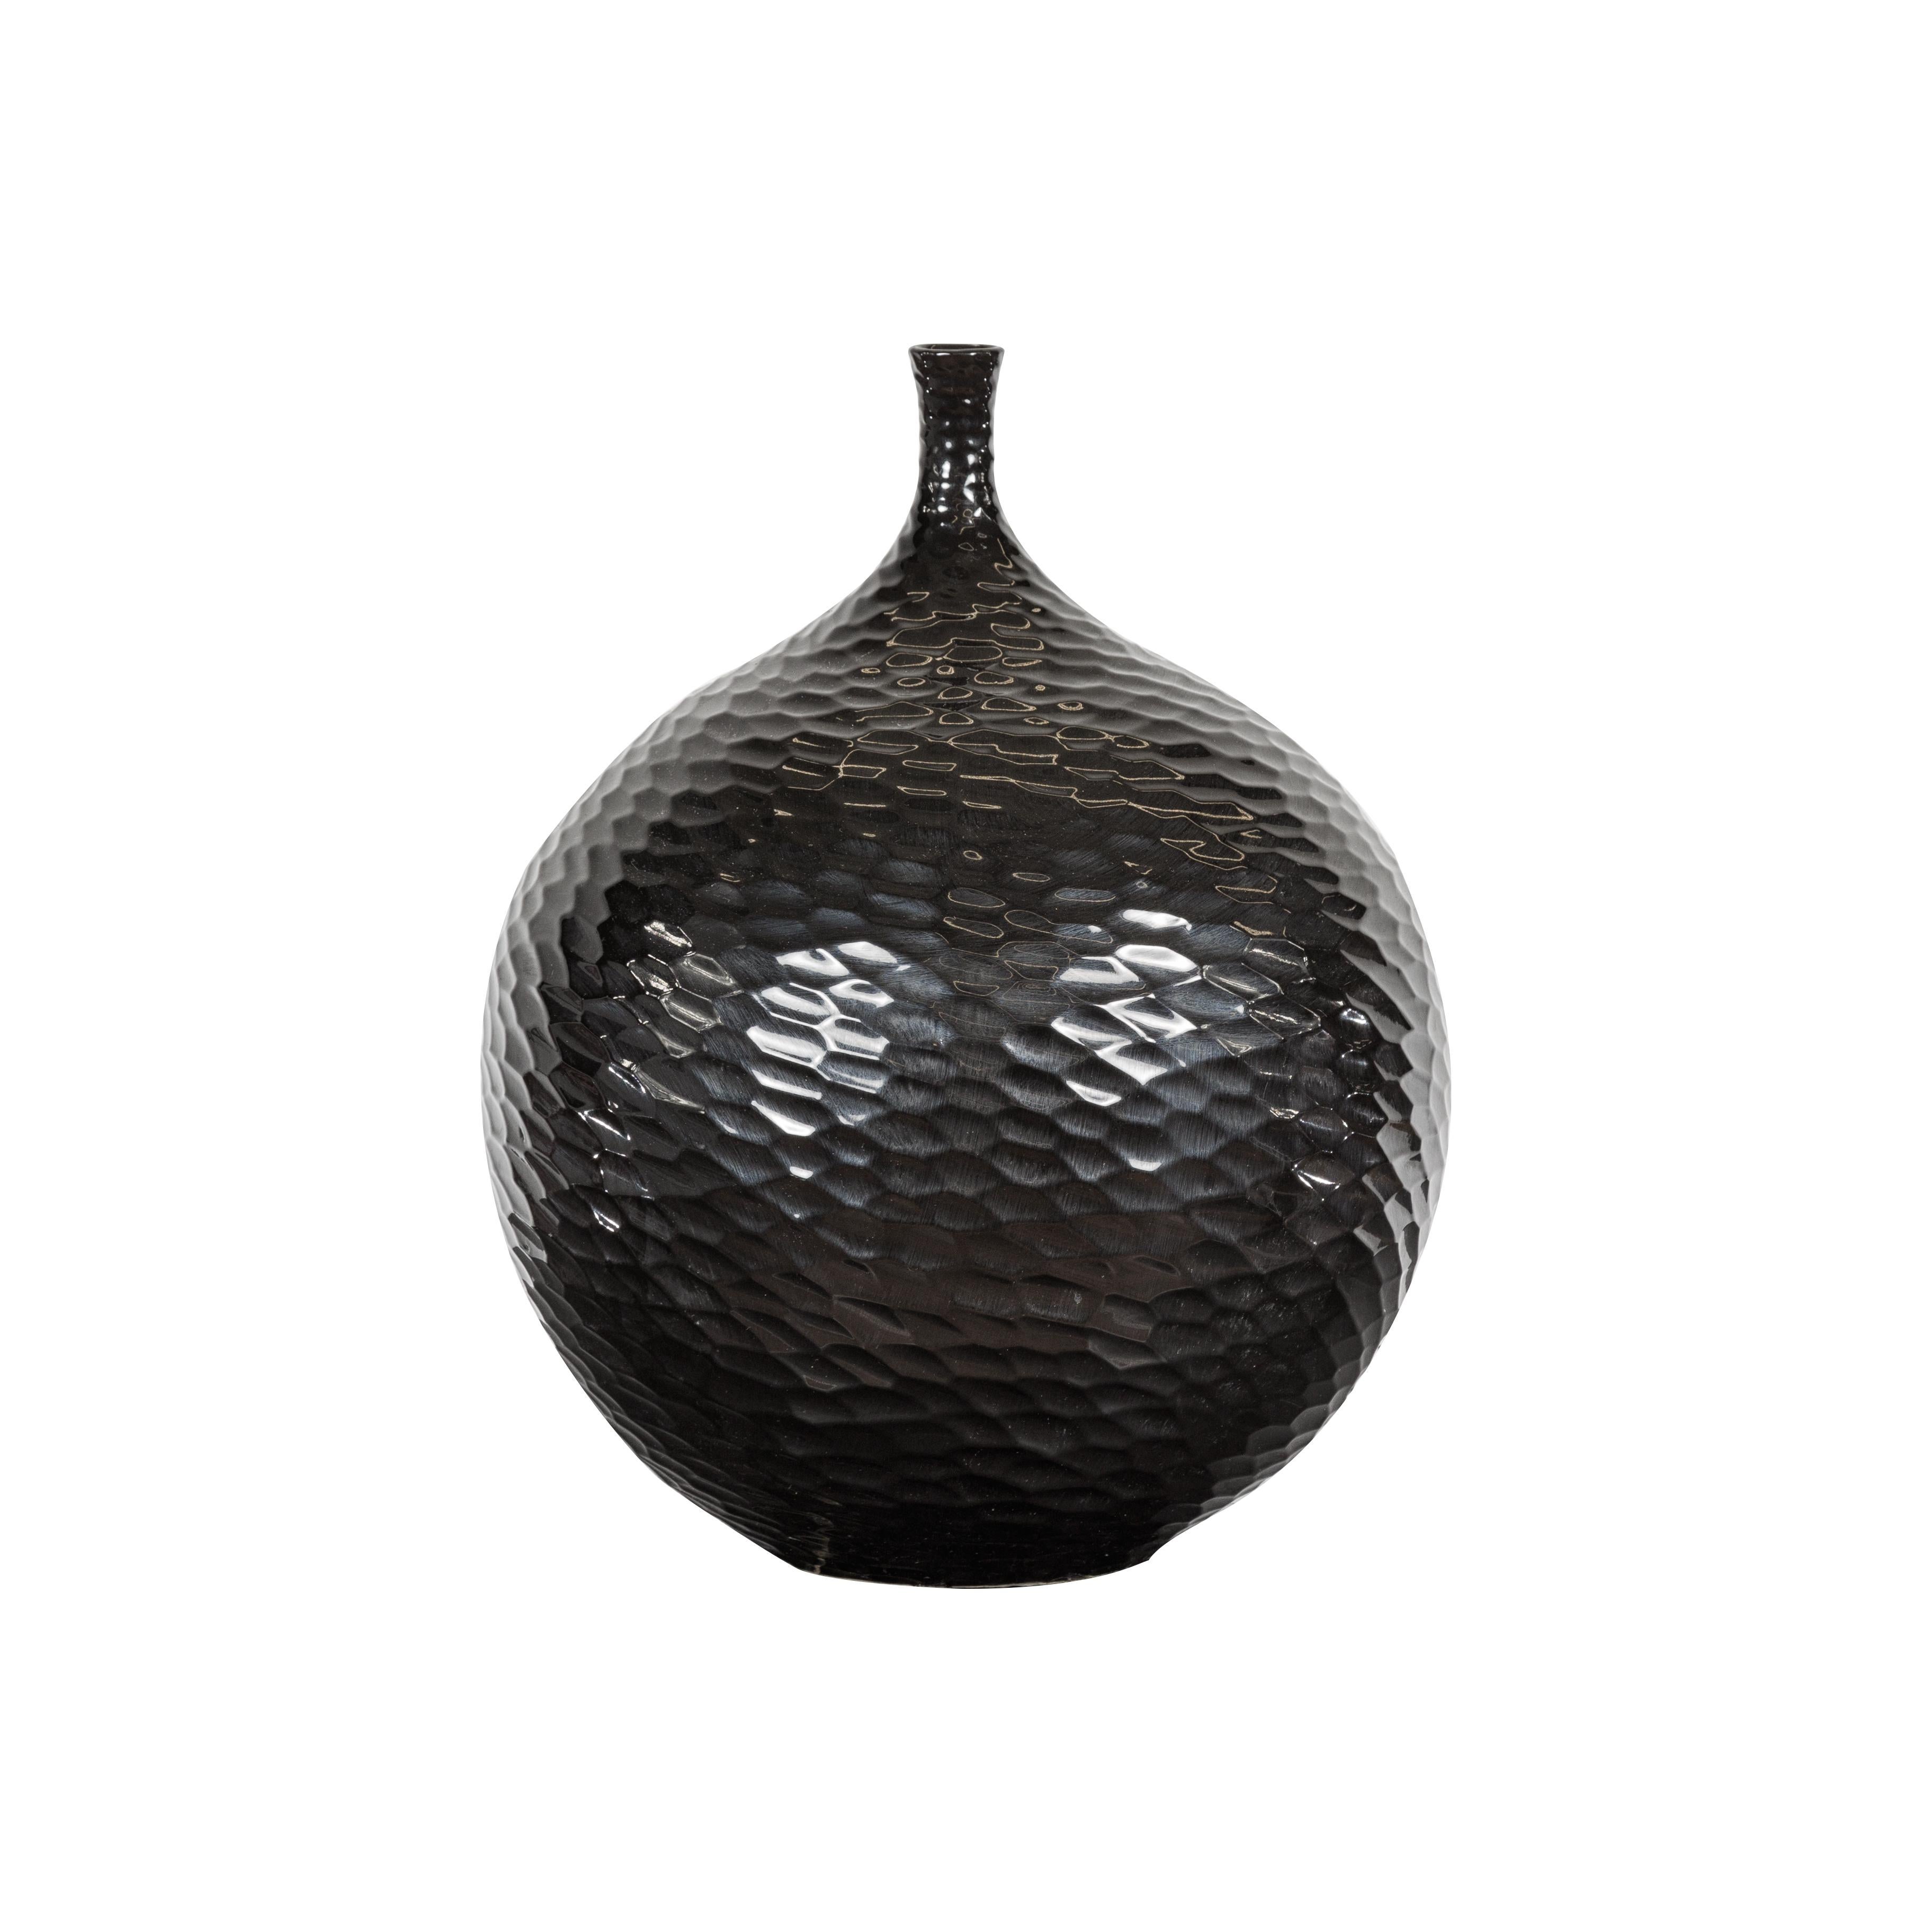 Artisan Black Glazed Bulb Shaped Vase with Honeycomb Patterns and Narrow Mouth For Sale 15